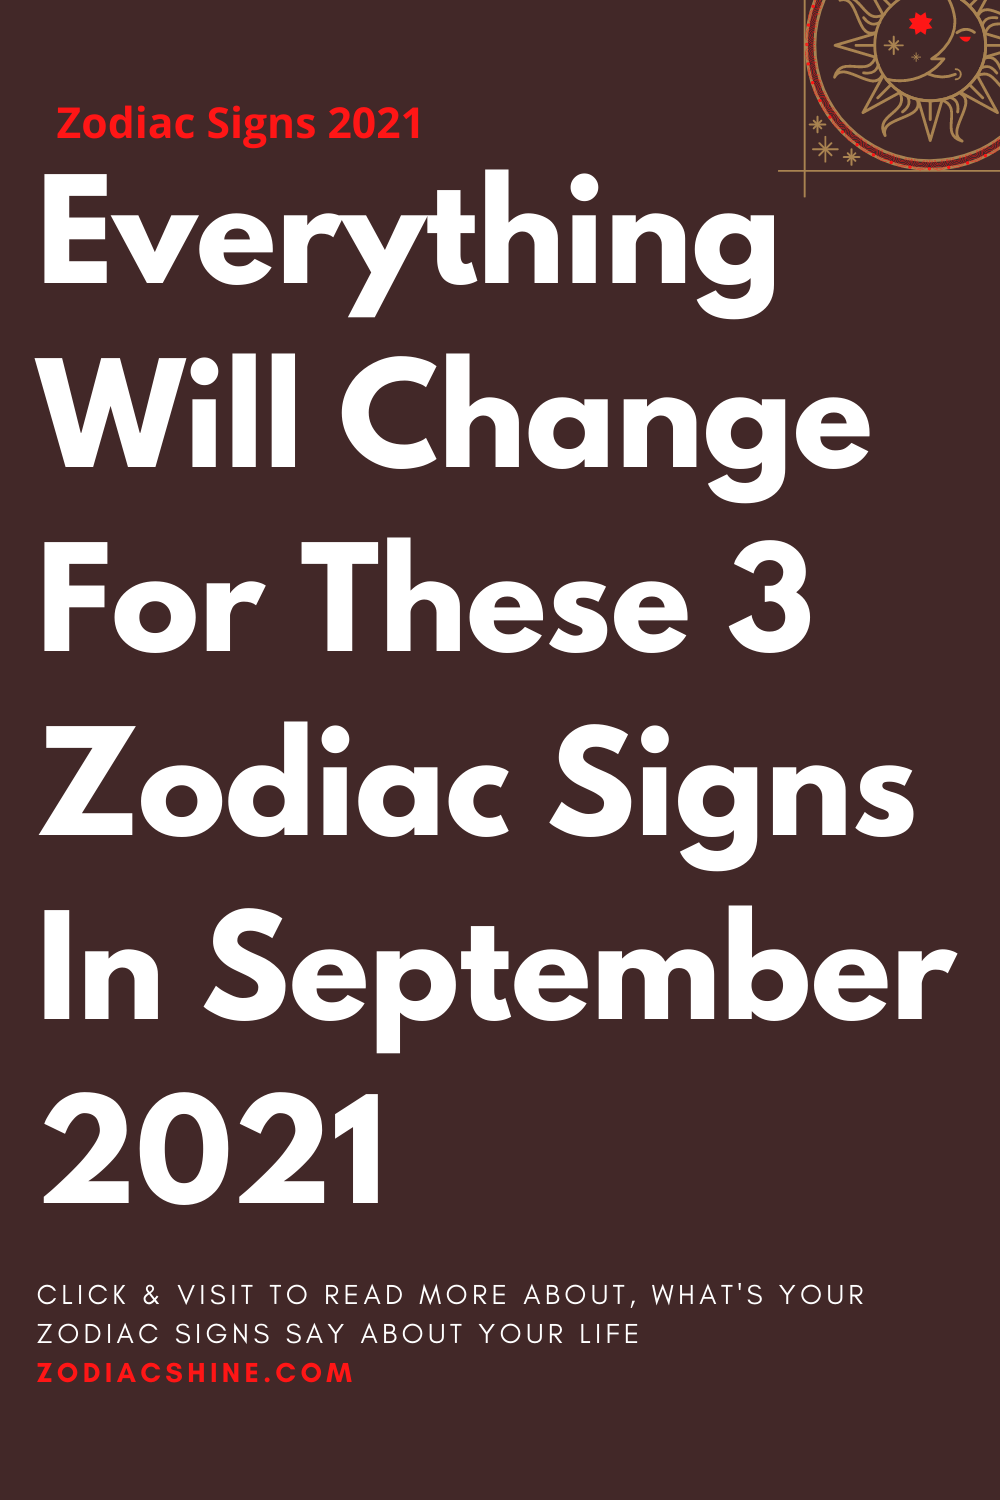 Everything Will Change For These 3 Zodiac Signs In September 2021